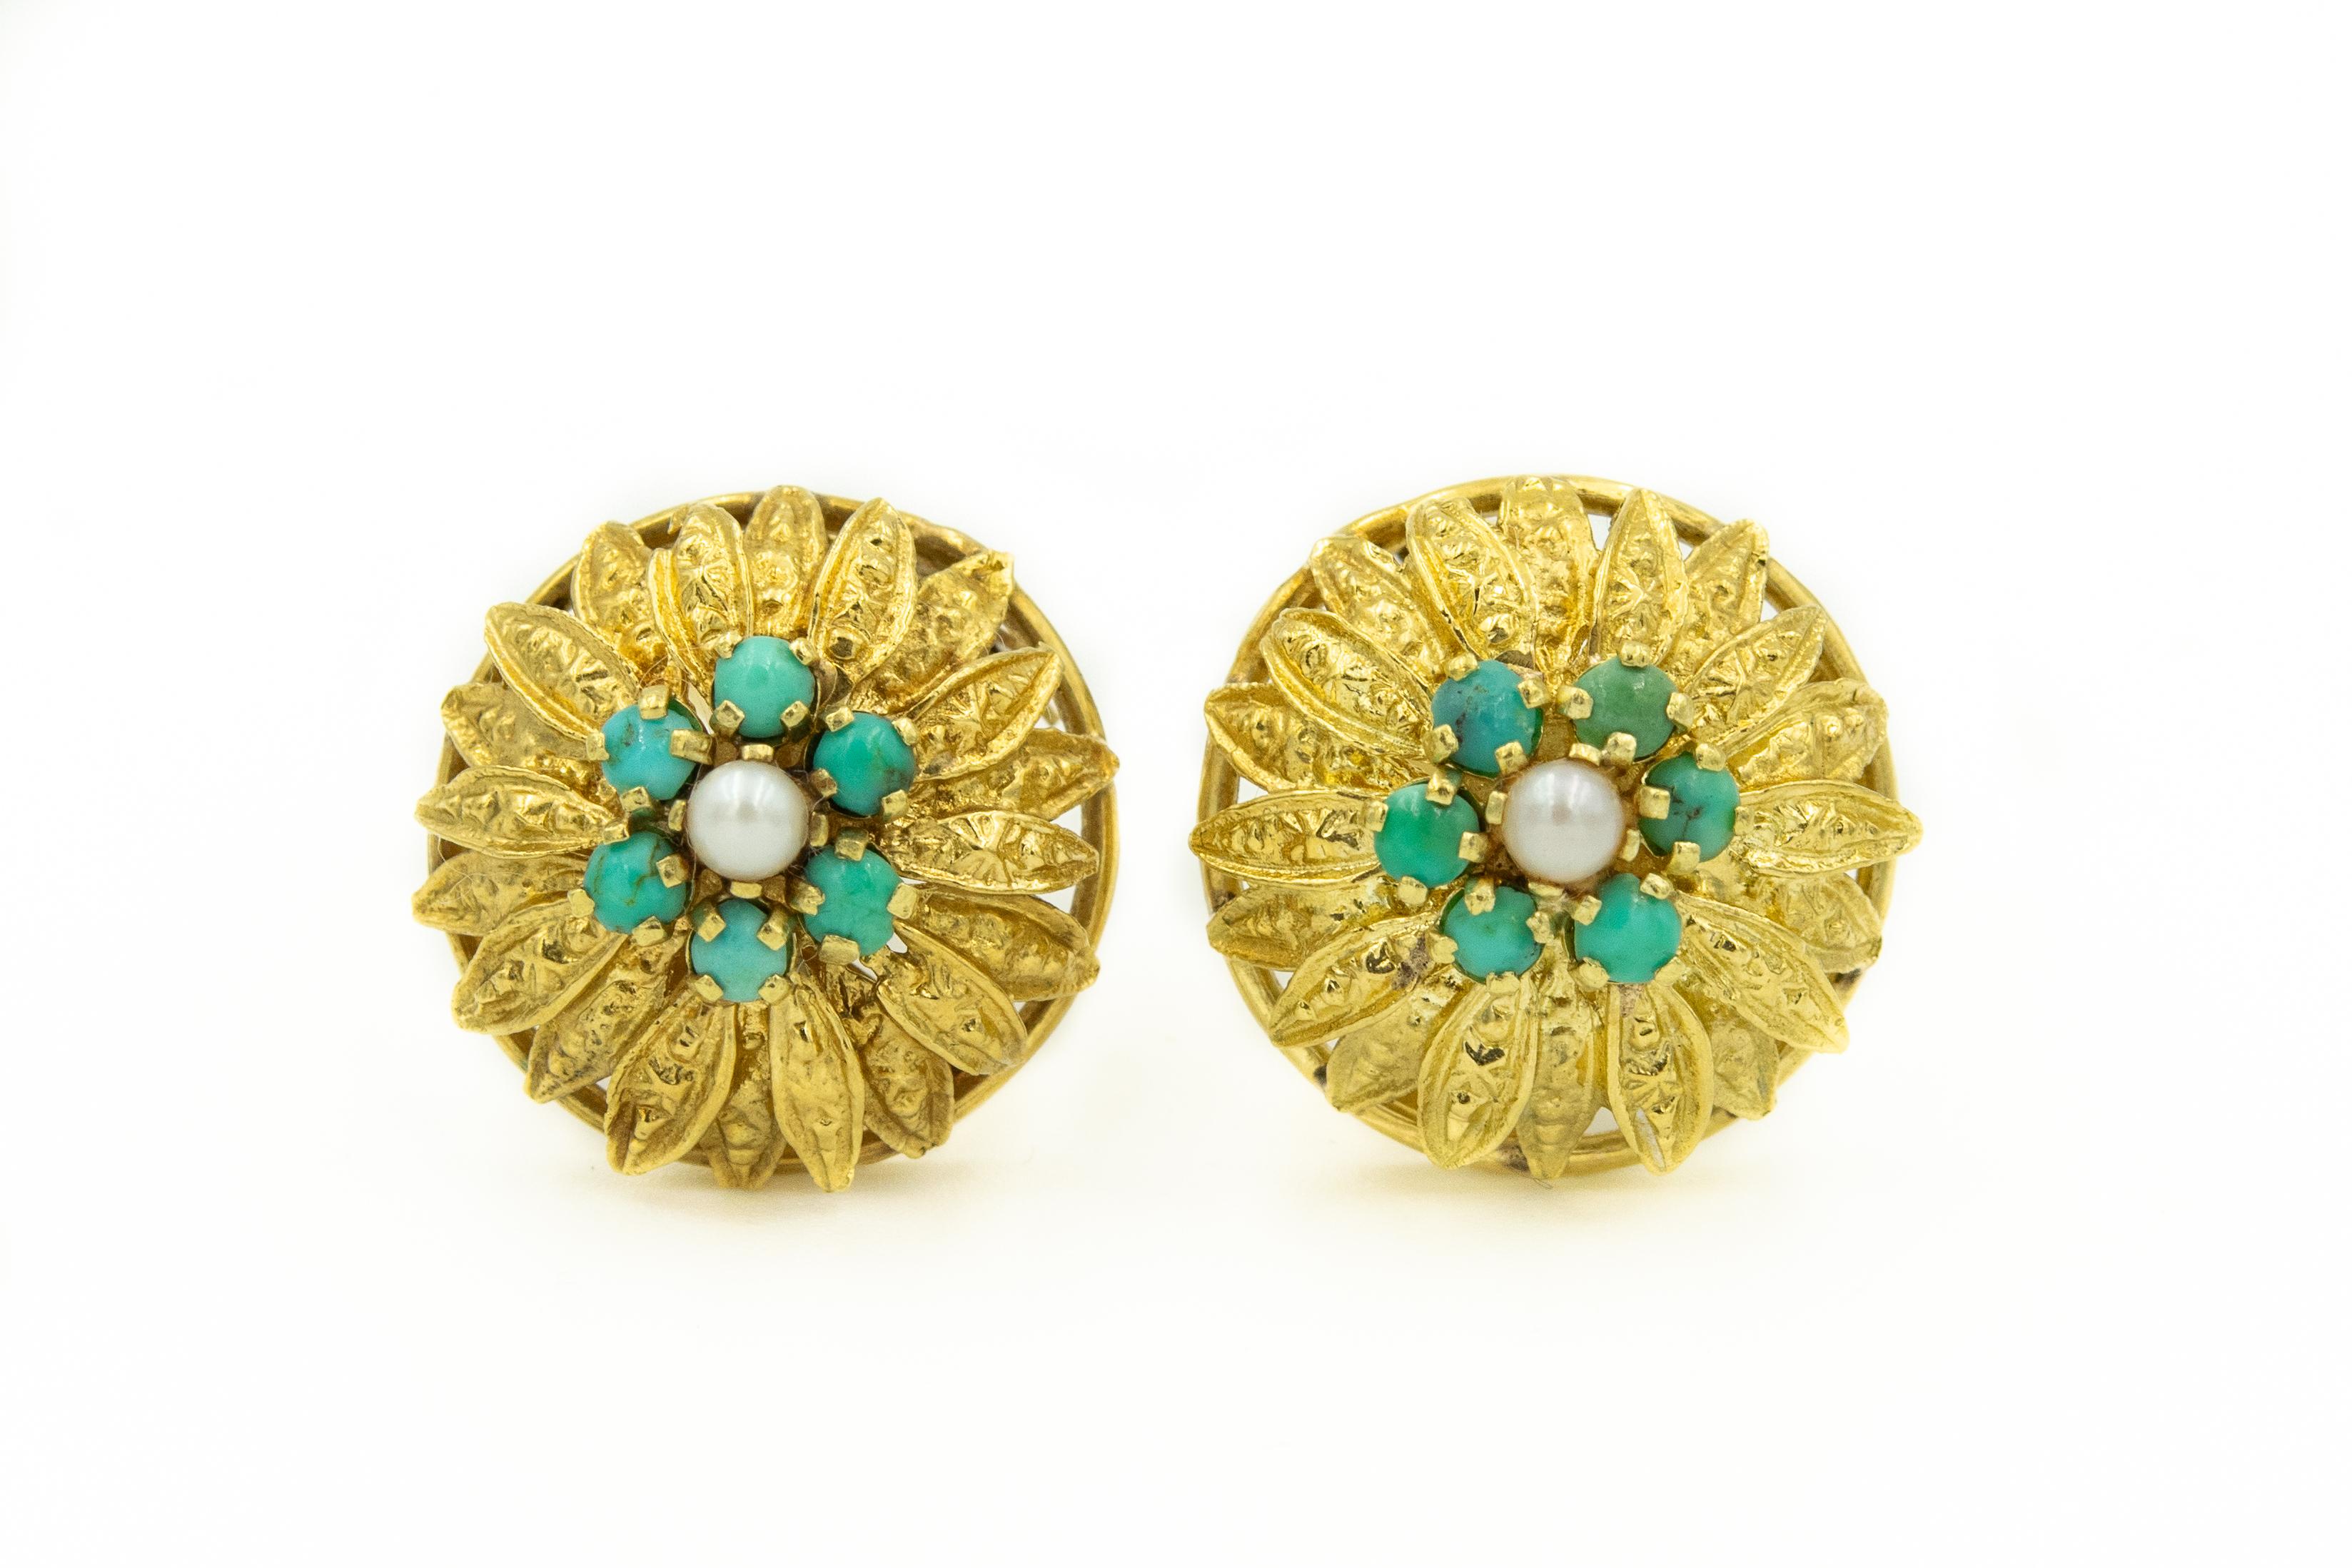 Delicate finely made dome clip-on earrings featuring a turquoise and pearl center amongst Etruscan style gold leaves.  Beautifully made in Israel in the mid 20th century.  These earrings are clip-on and have no post so are perfect for someone